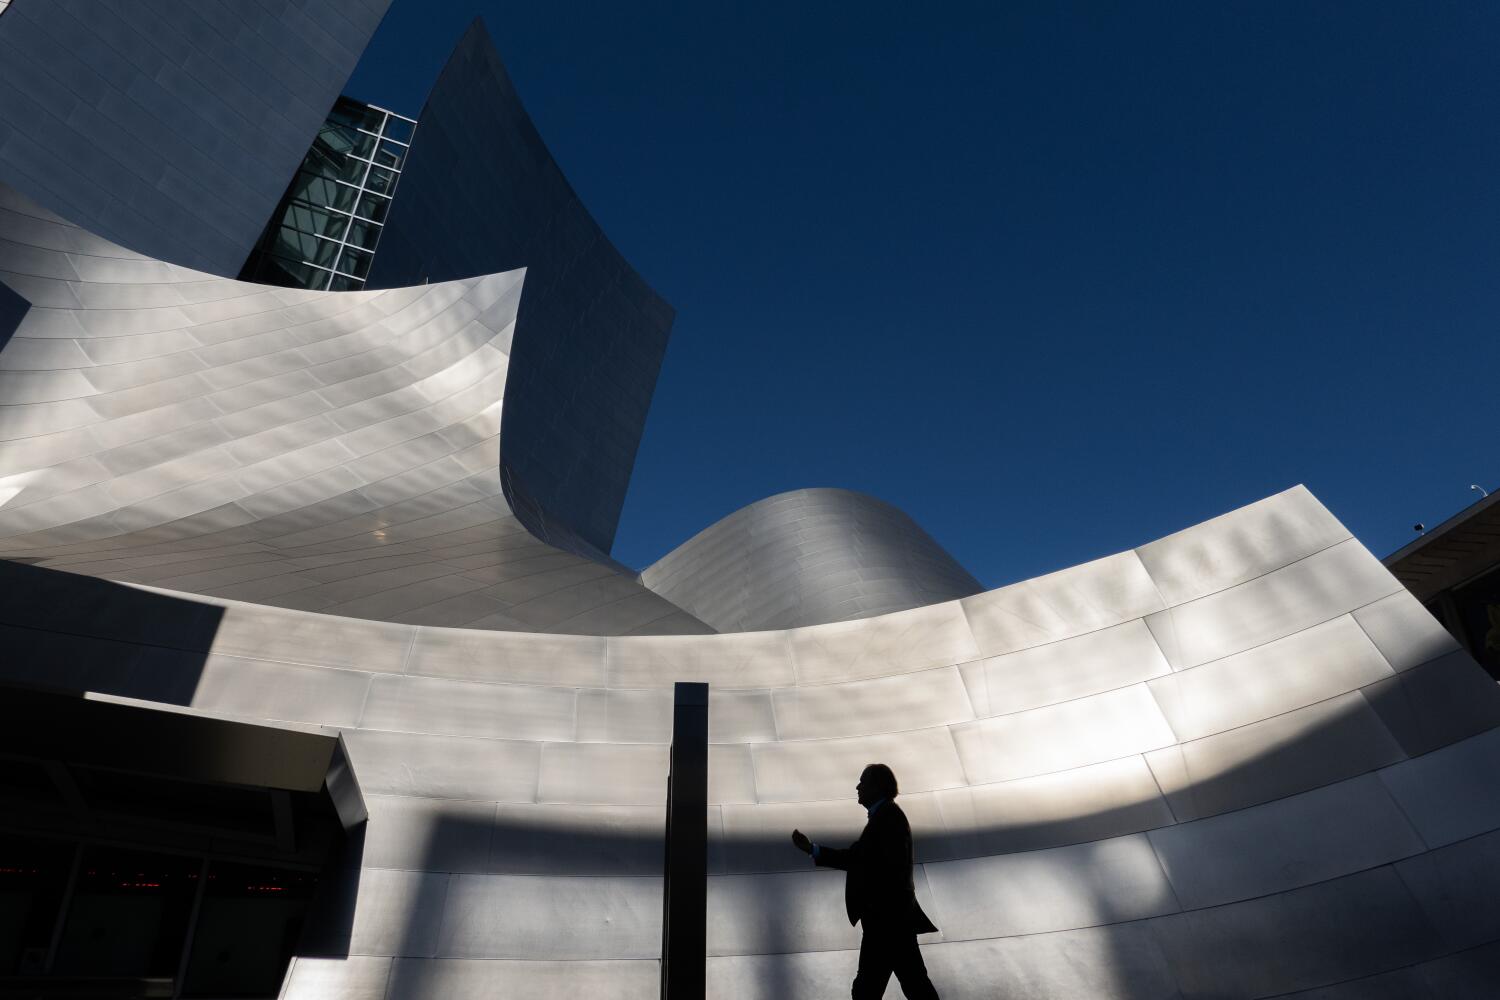 Downtown L.A. is hurting. Frank Gehry thinks arts can lead a revival